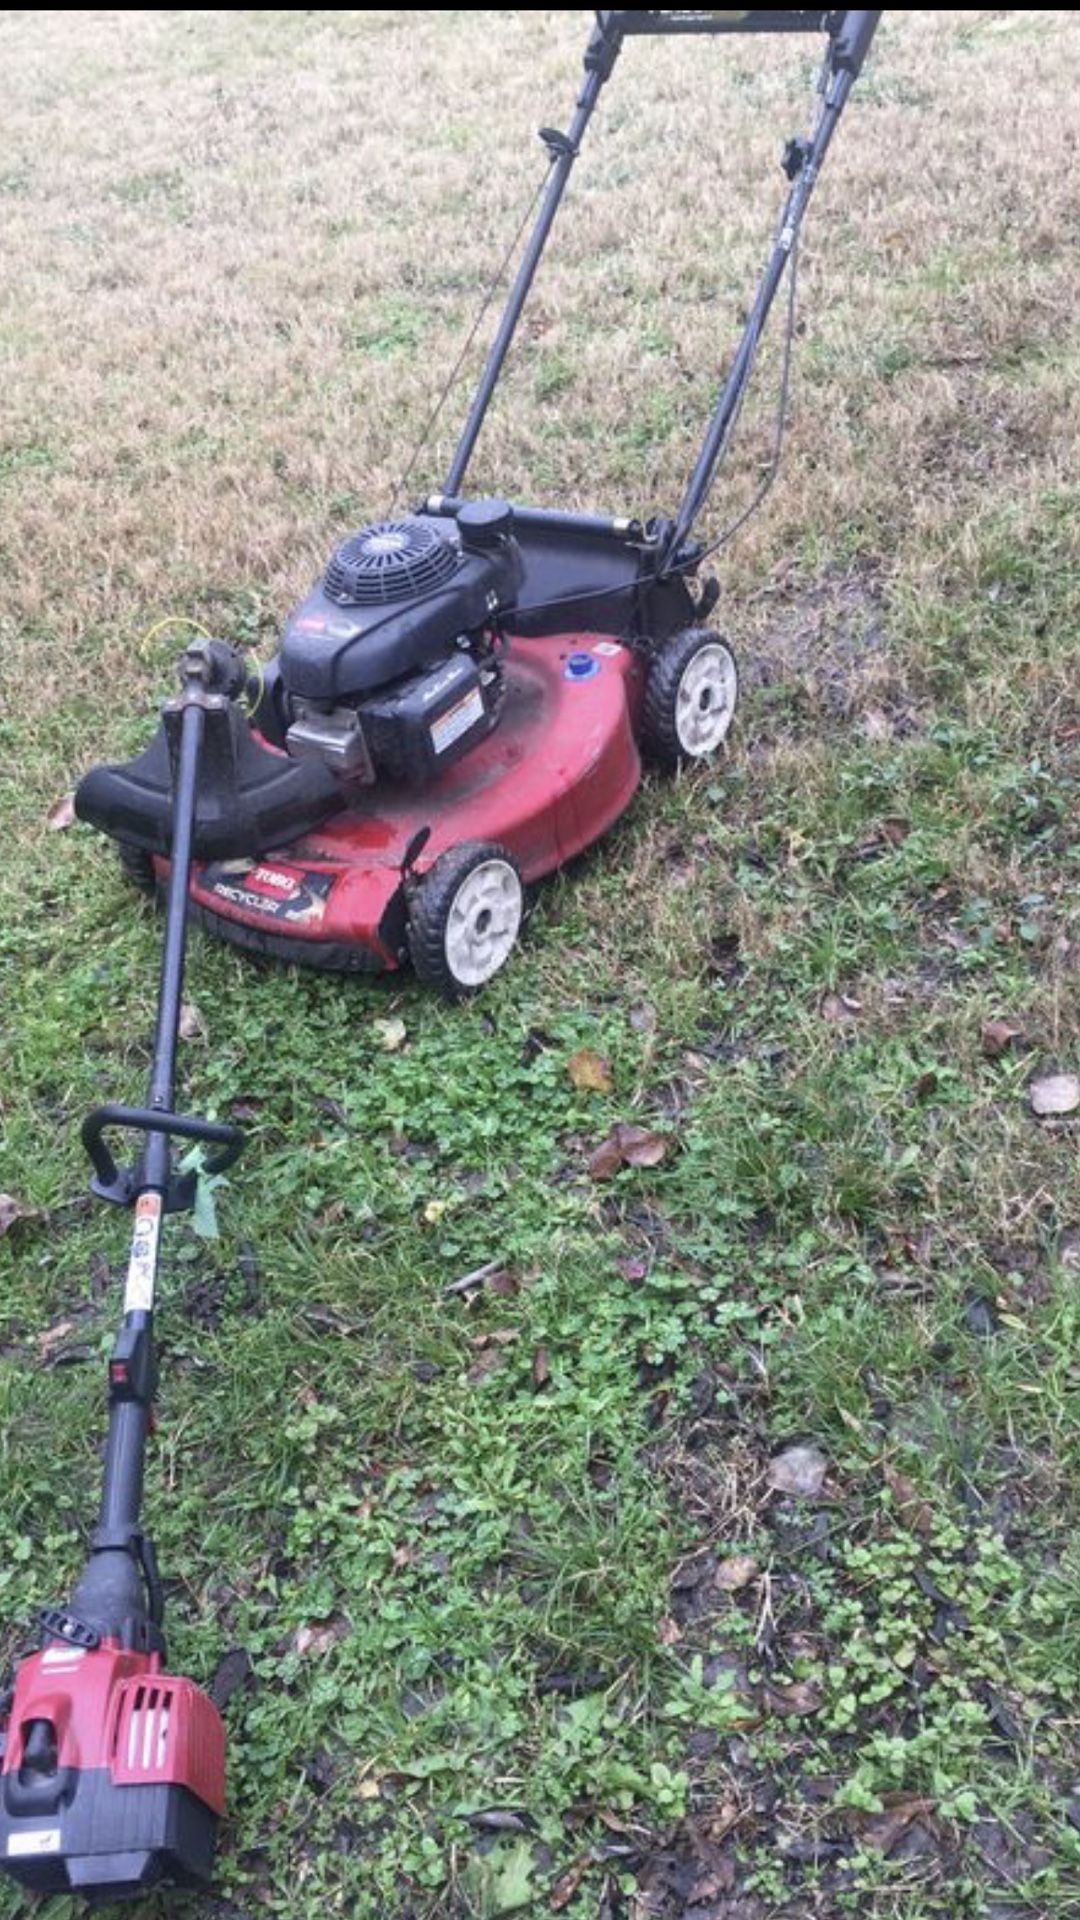 Transmission lawn mower, starts at firs pull and weed eater